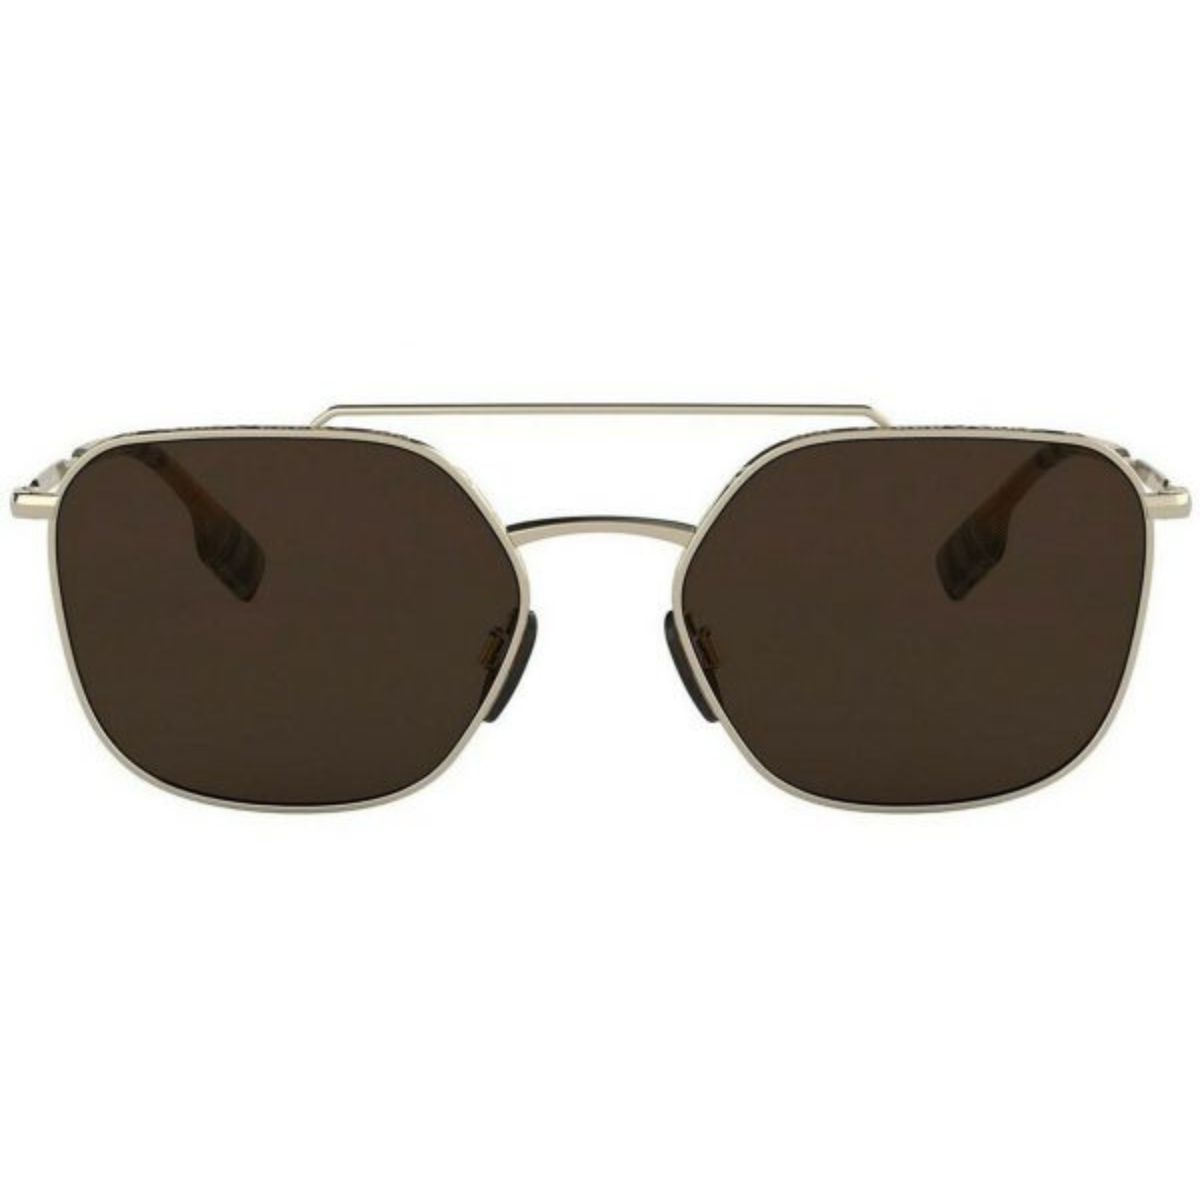 "Explore the latest collection of Burberry 3107 sunglasses for a fashion-forward look at Optorium."